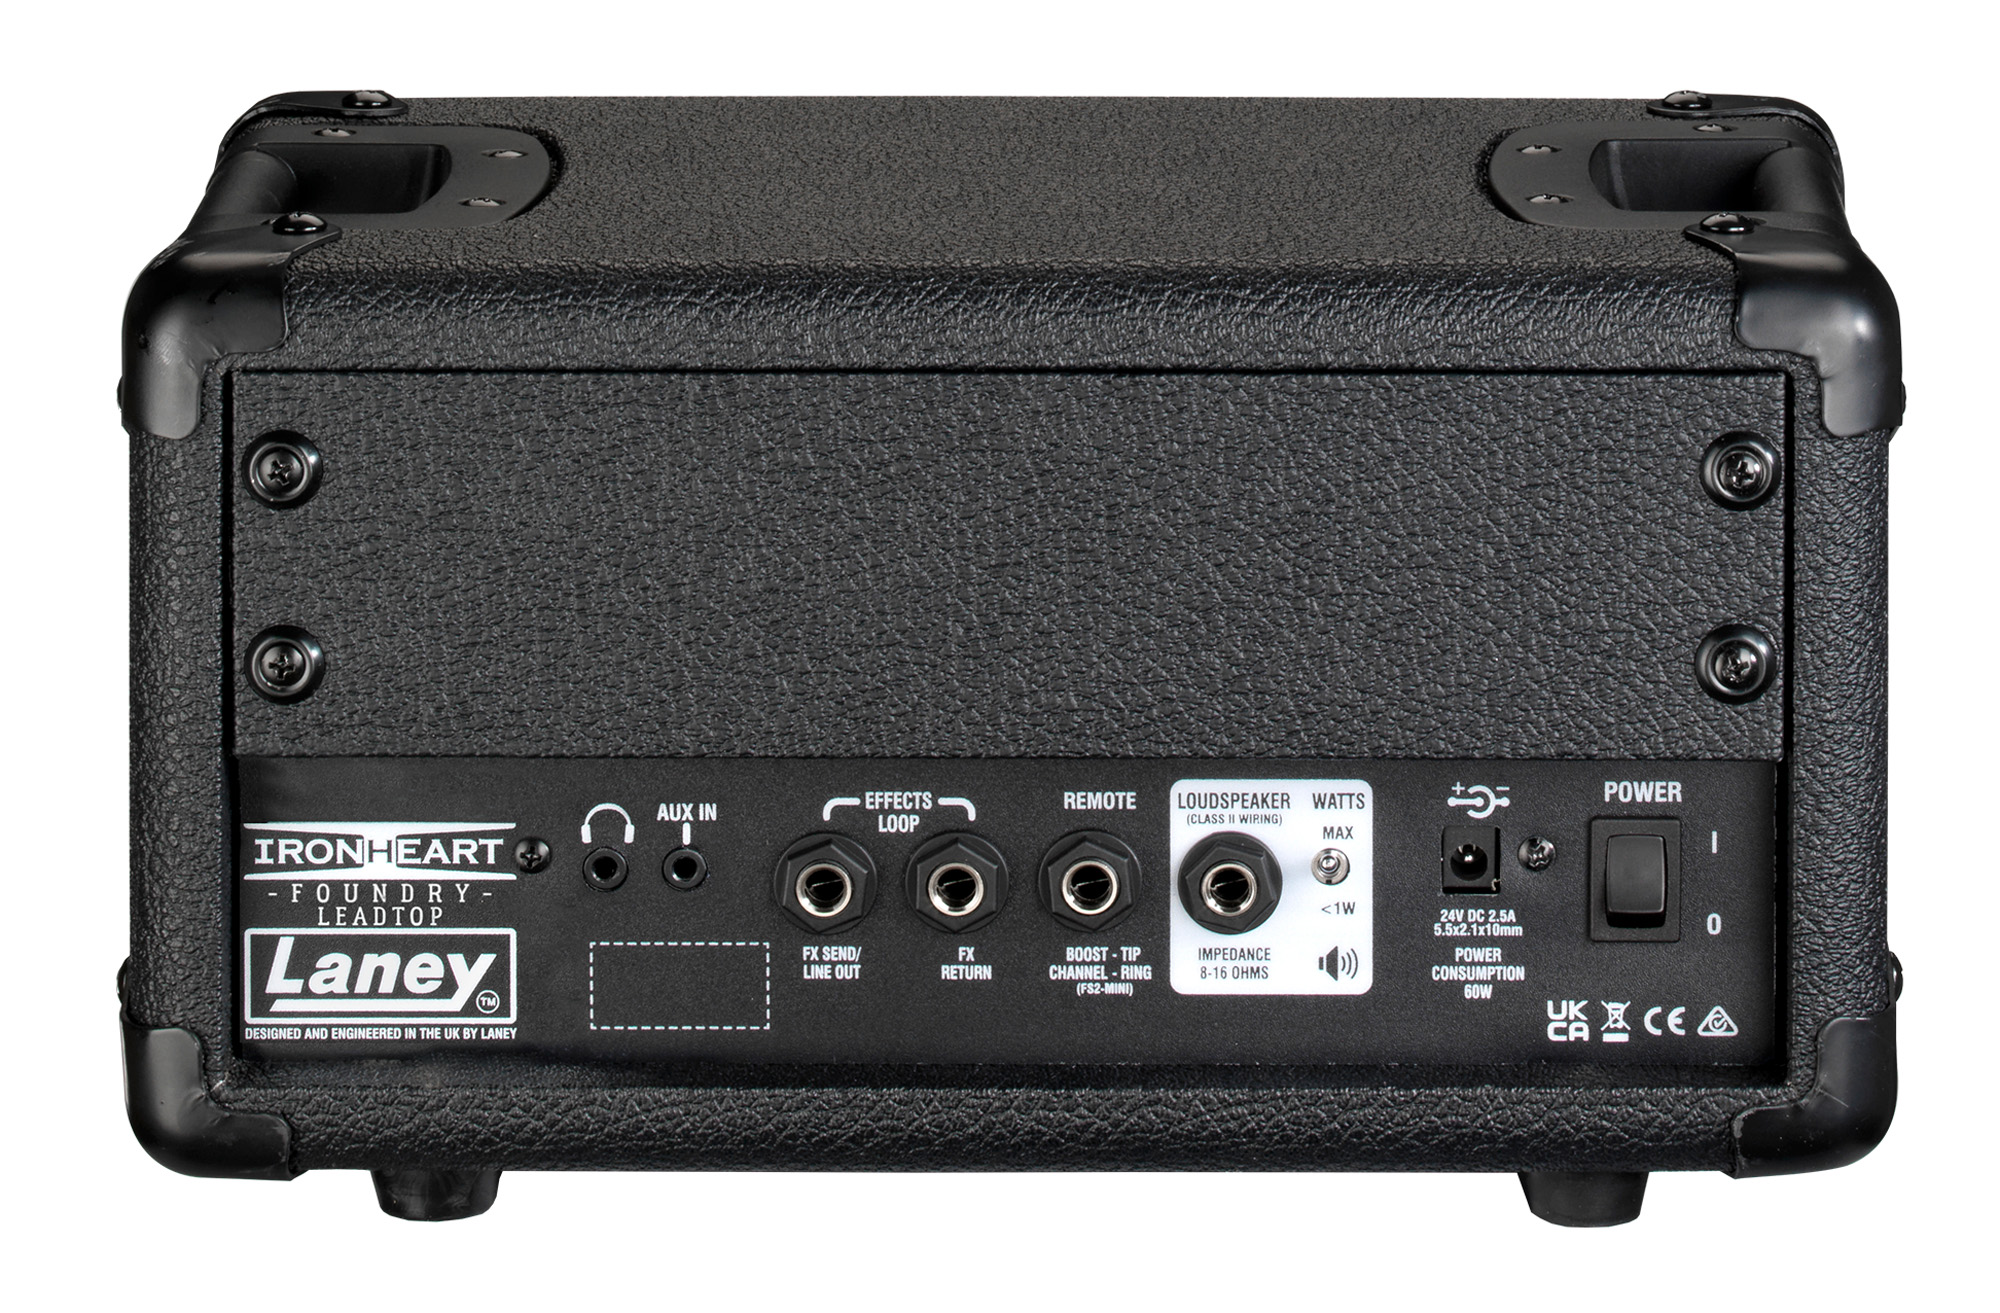 Laney Irf Leadtop 60w - Electric guitar amp head - Variation 1